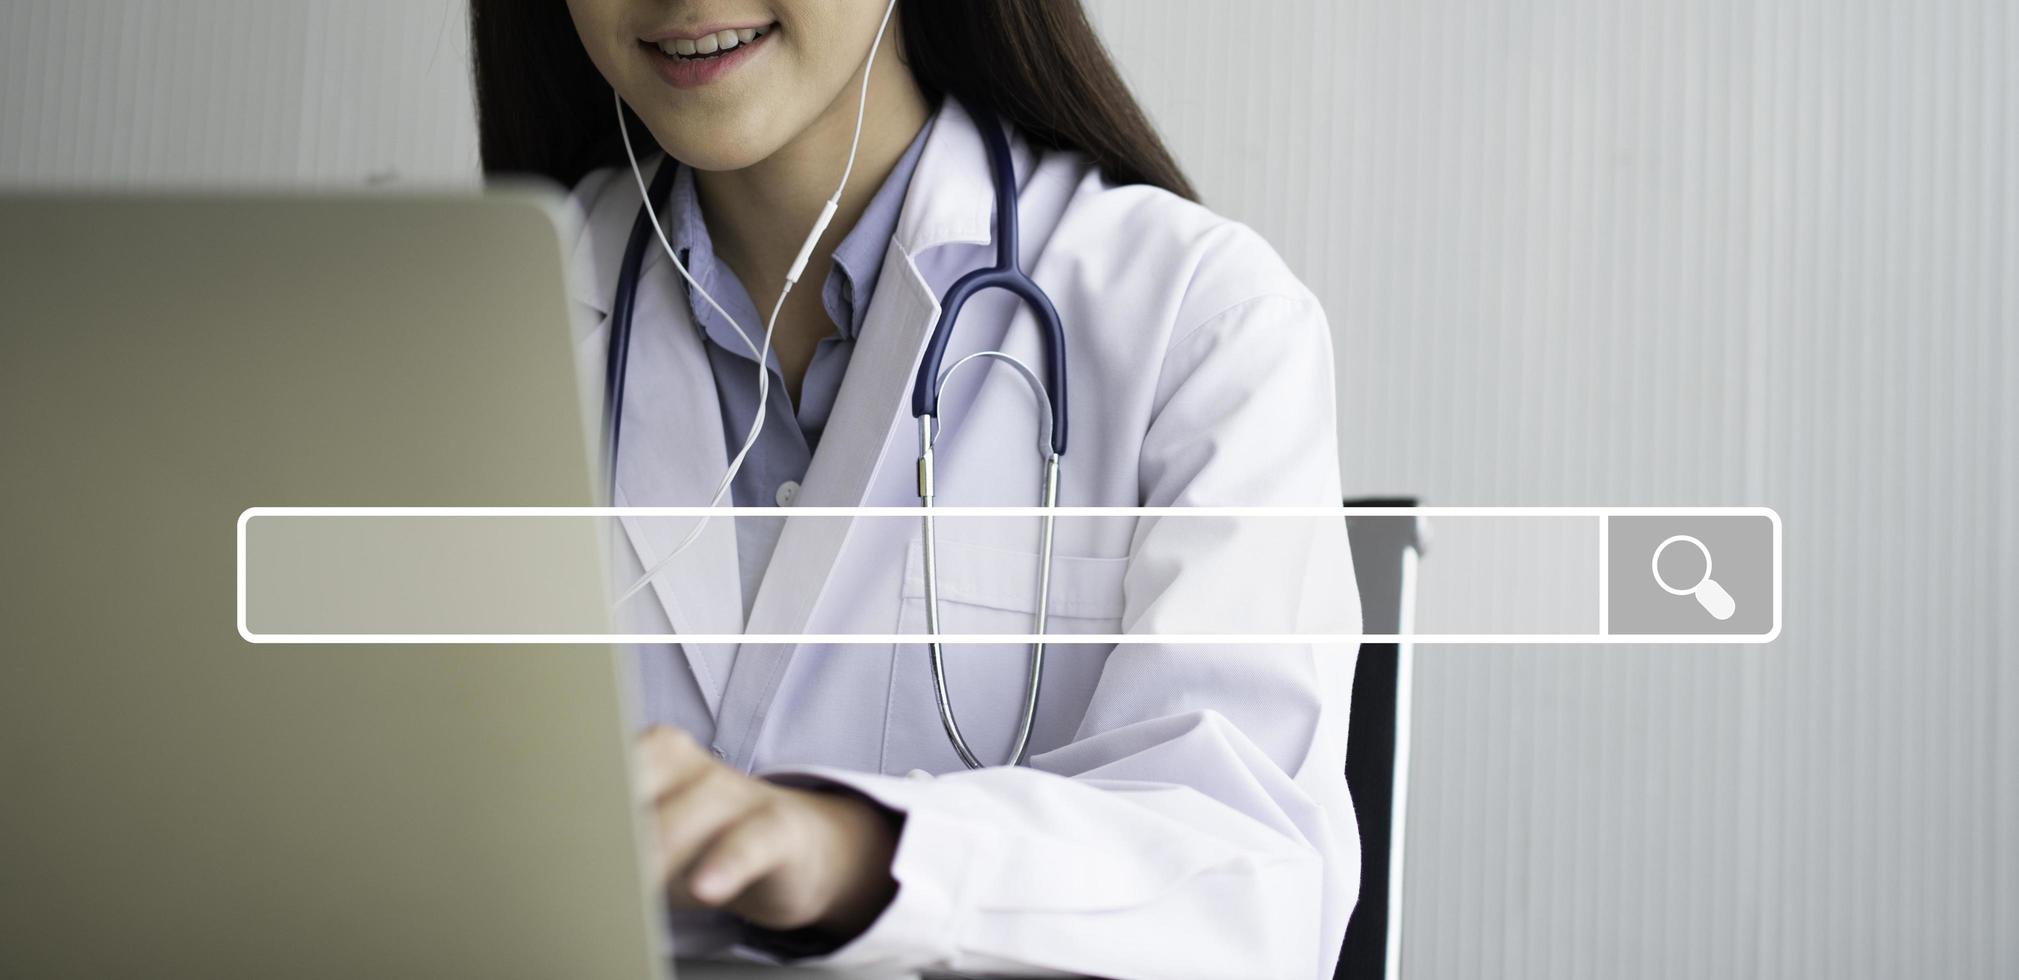 Searching browsing internet bar on Asian woman doctor is online visiting with a patient background, Concept of Searching Browsing Internet Data Information Networking for medical and healthcare photo